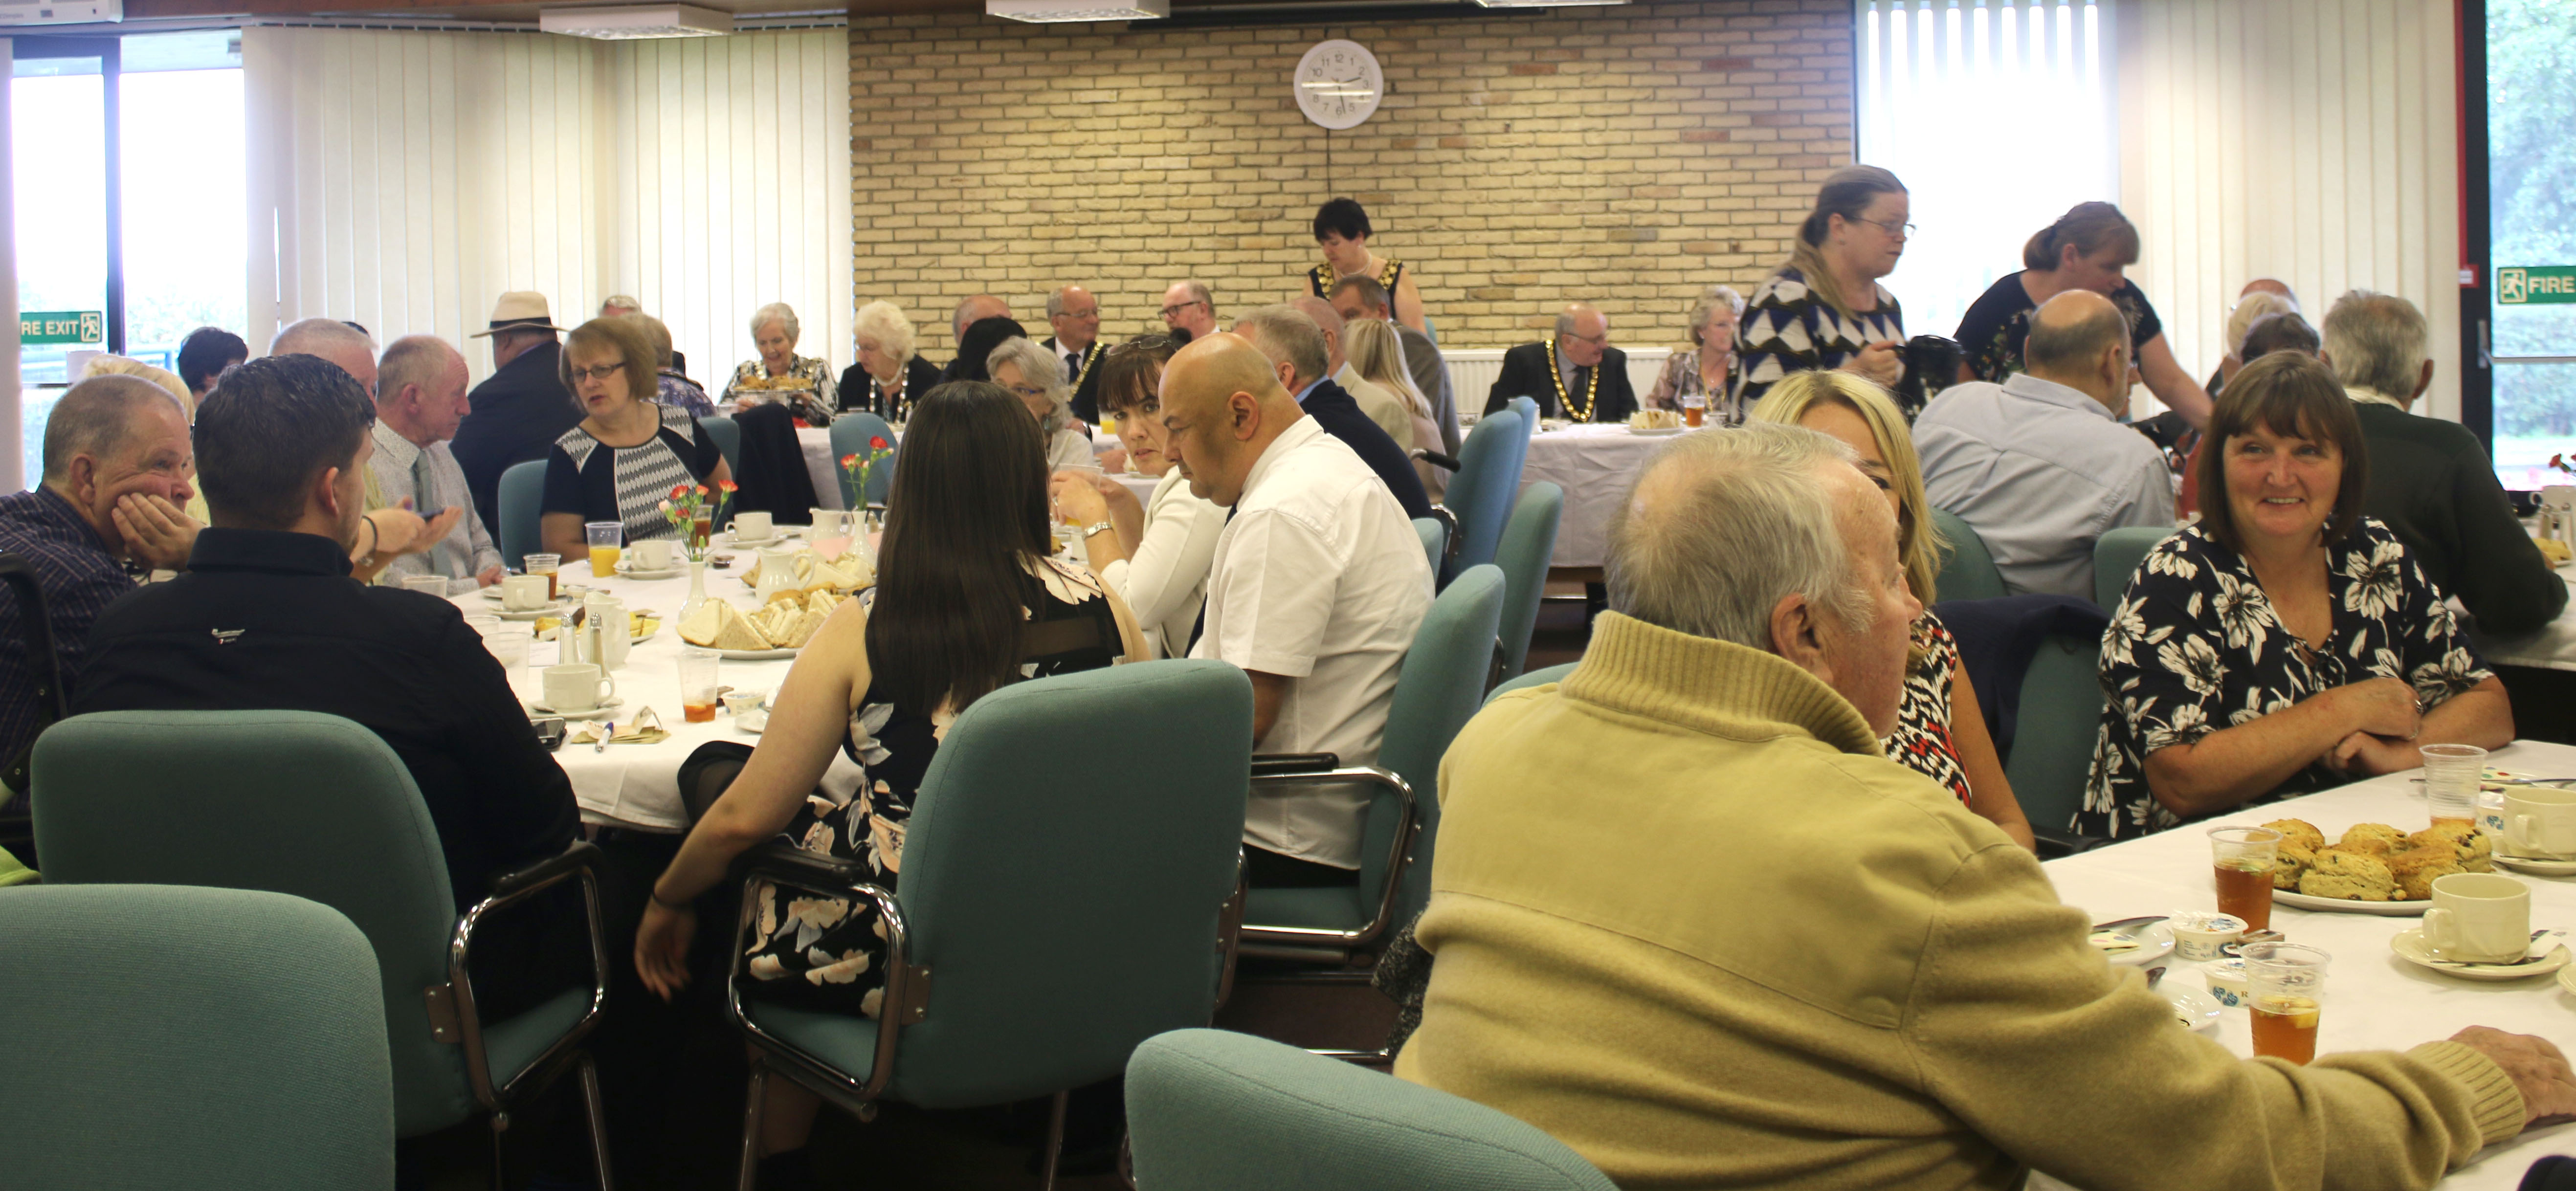 Mayor’s “At Home” Tea Raises £400 for MRI Scanners Appeal